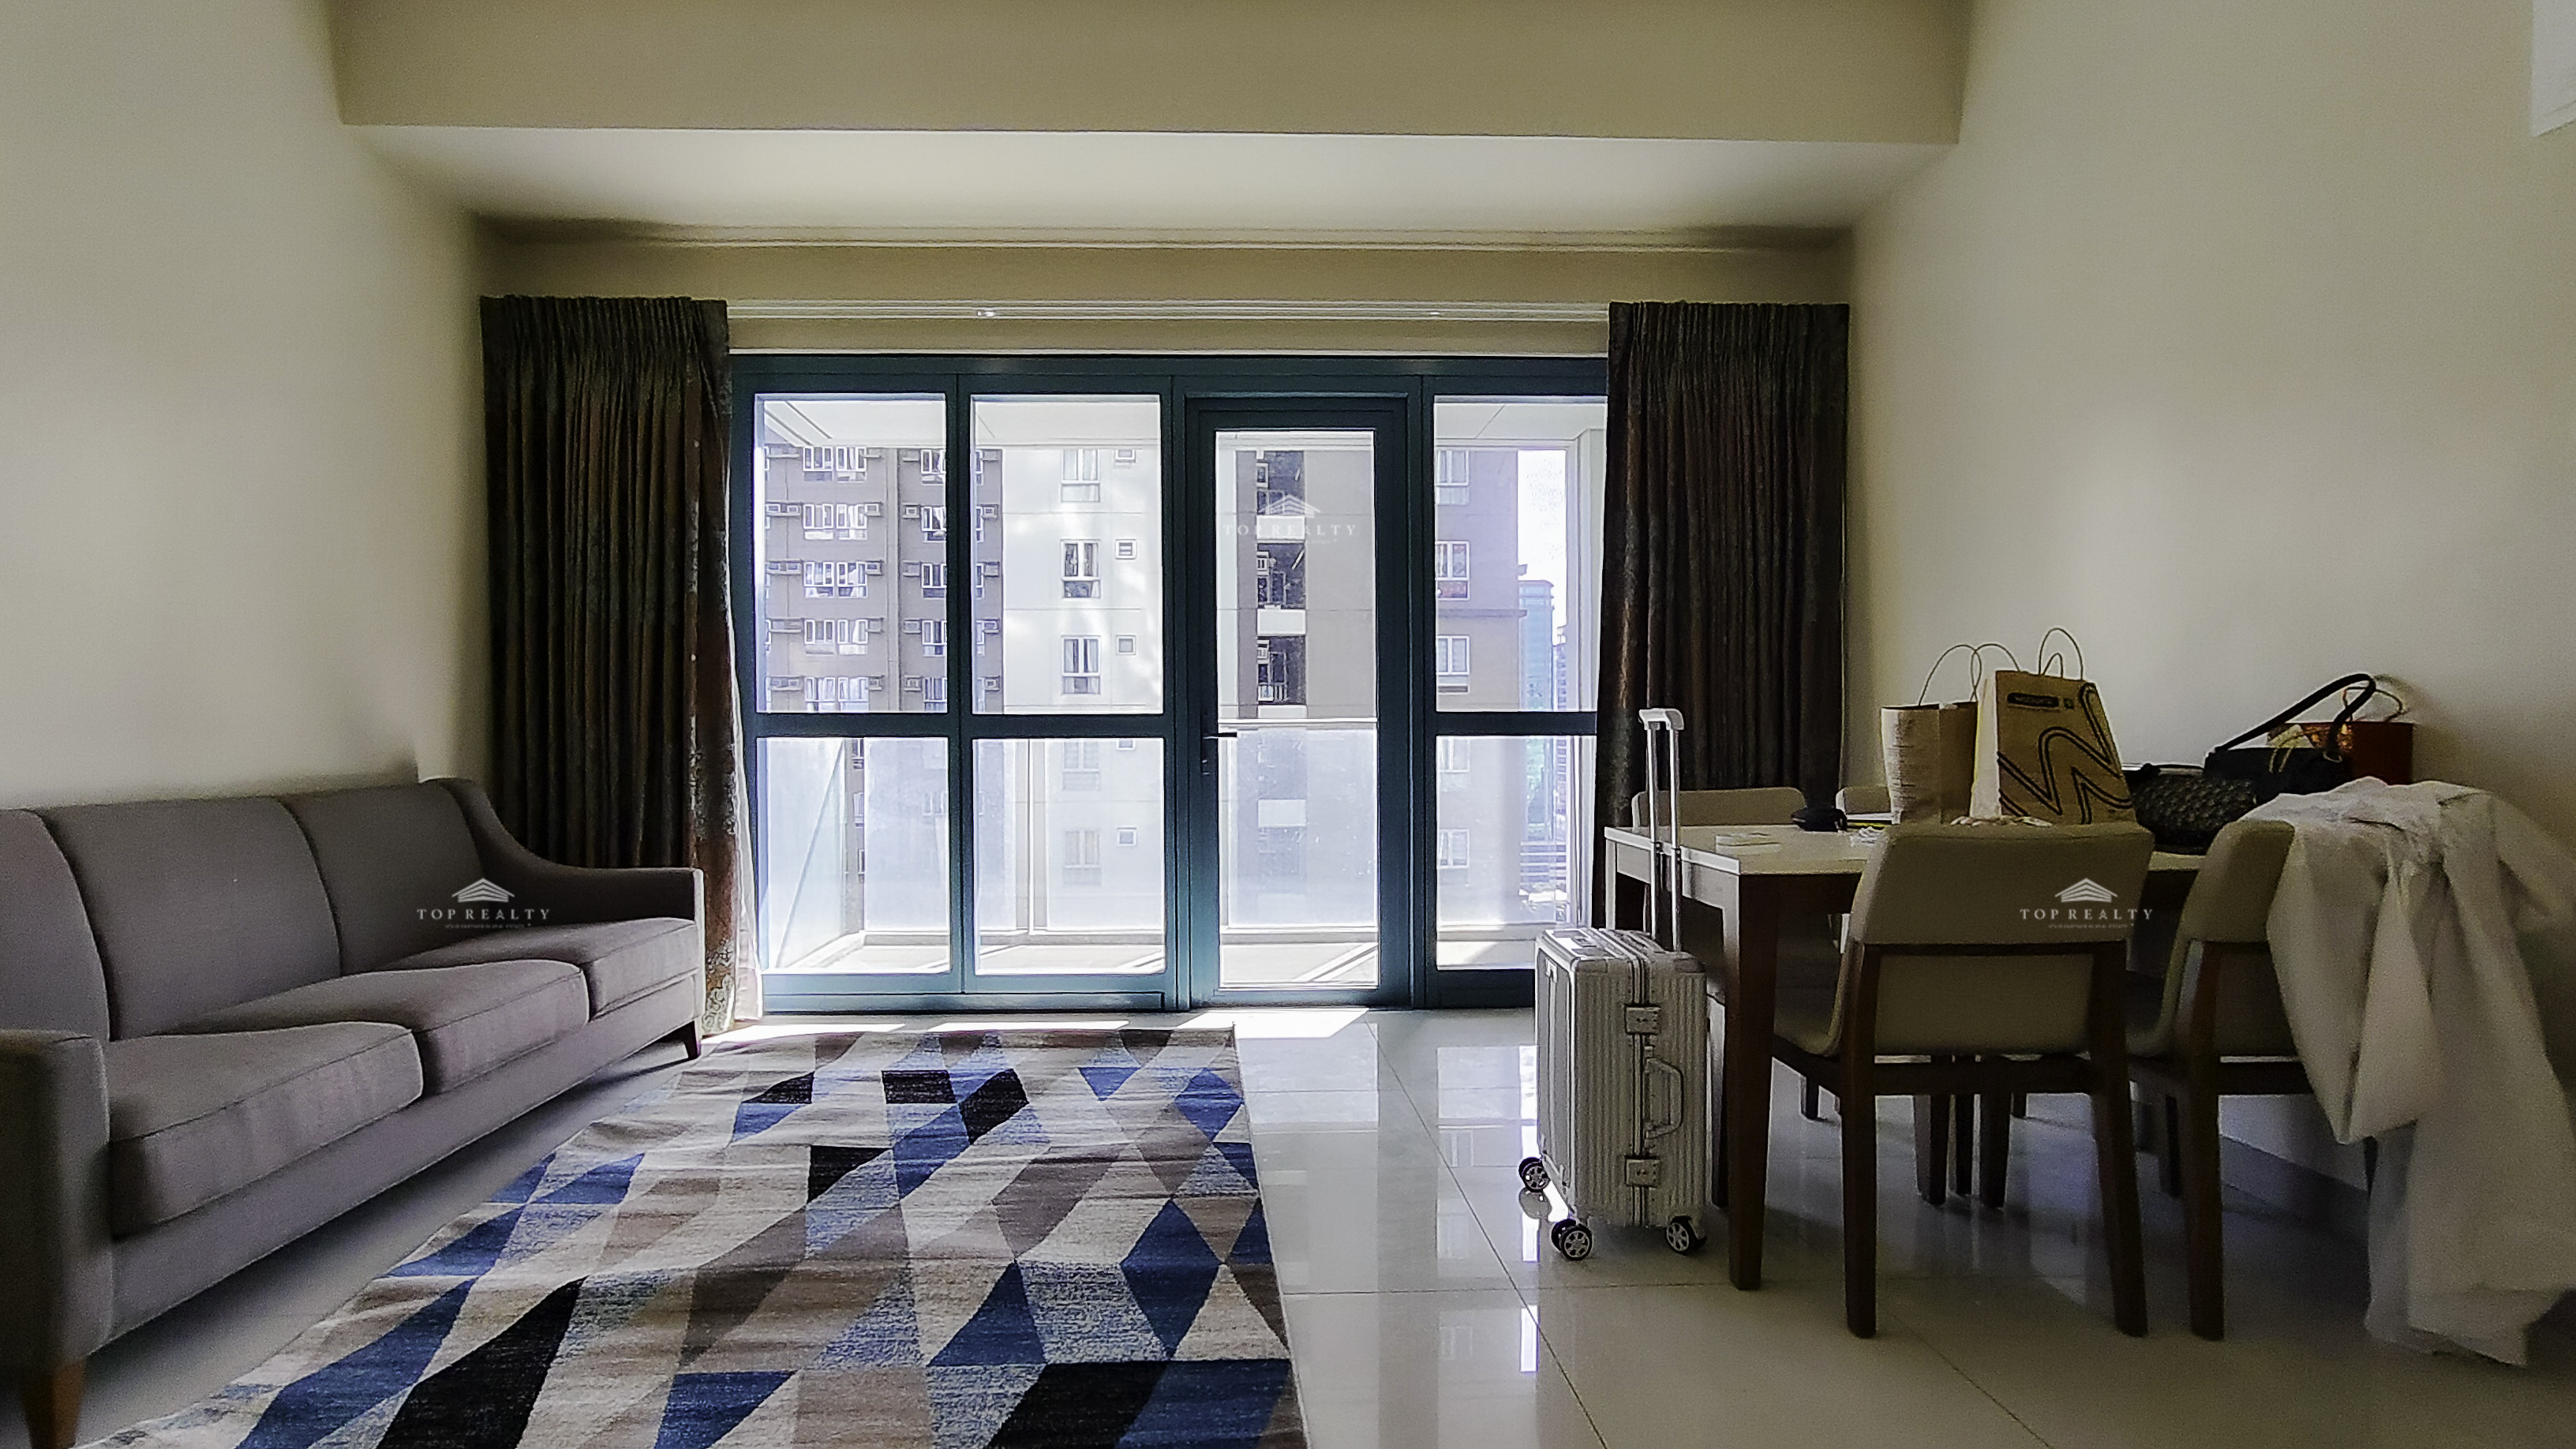 For Sale: 2BR Condo Unit in One Uptown Residences, BGC, Taguig City